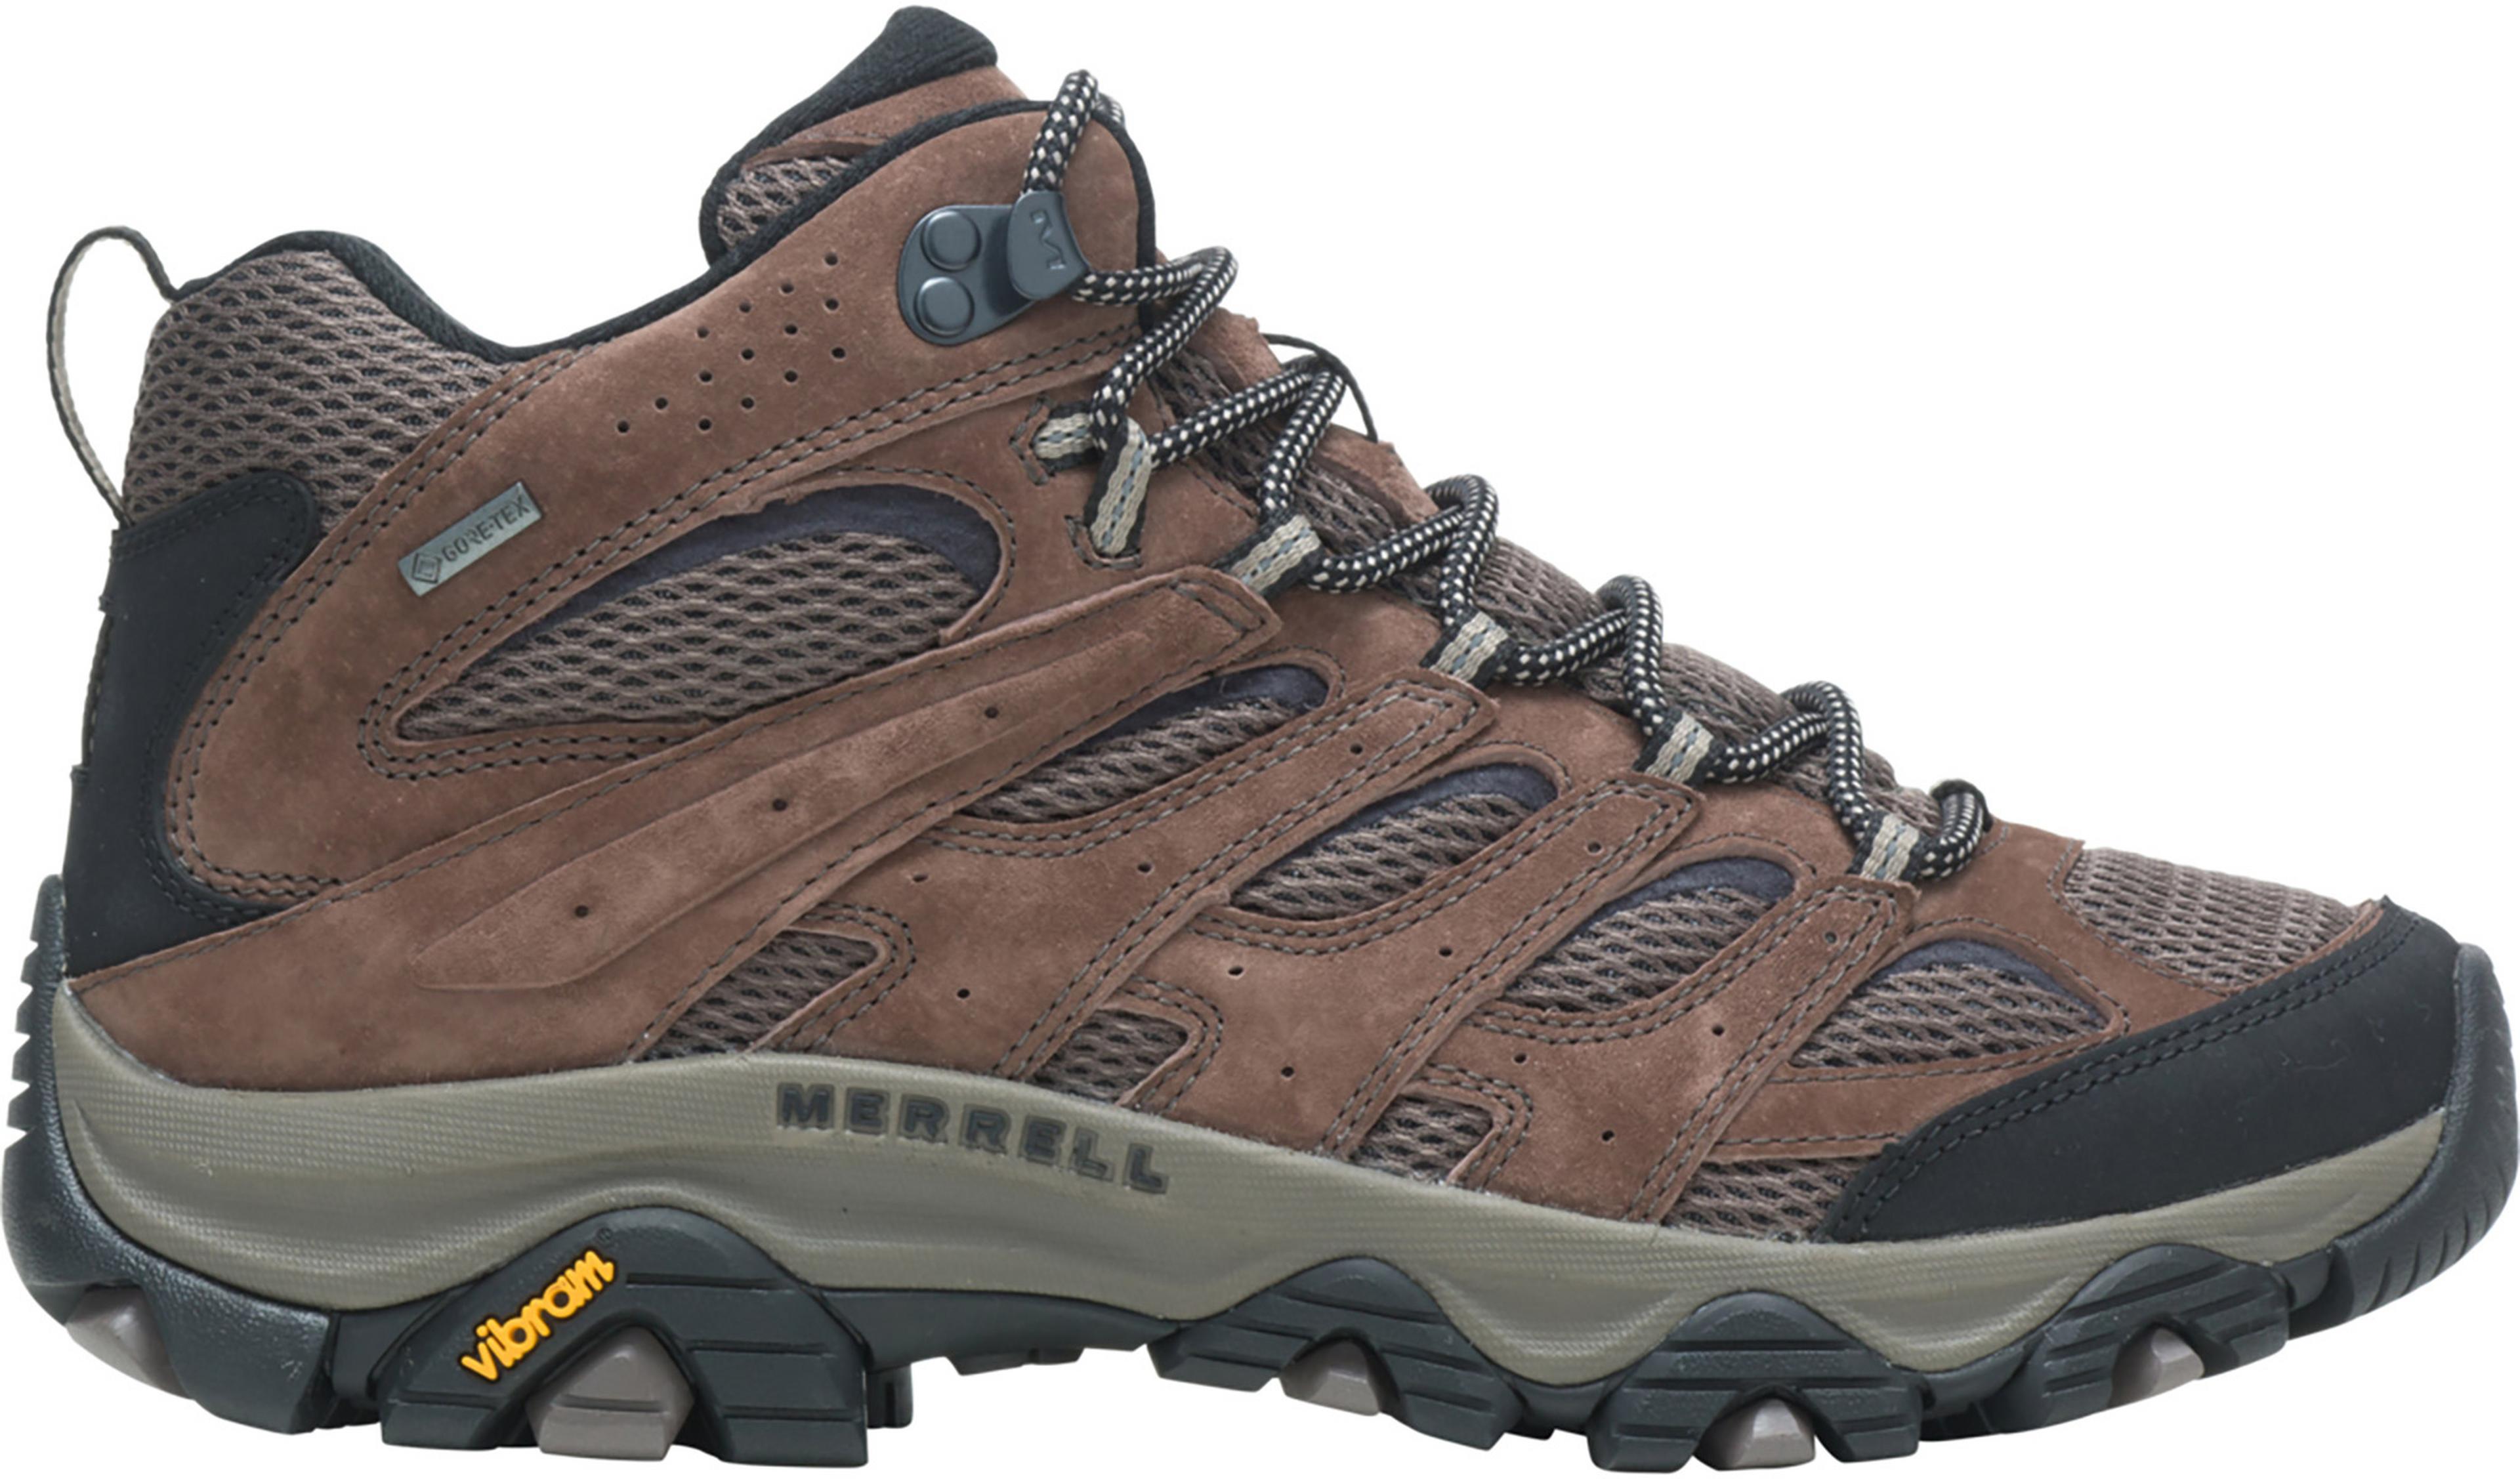 Merrell Moab 3 Mid Gore-Tex Hiking Boots